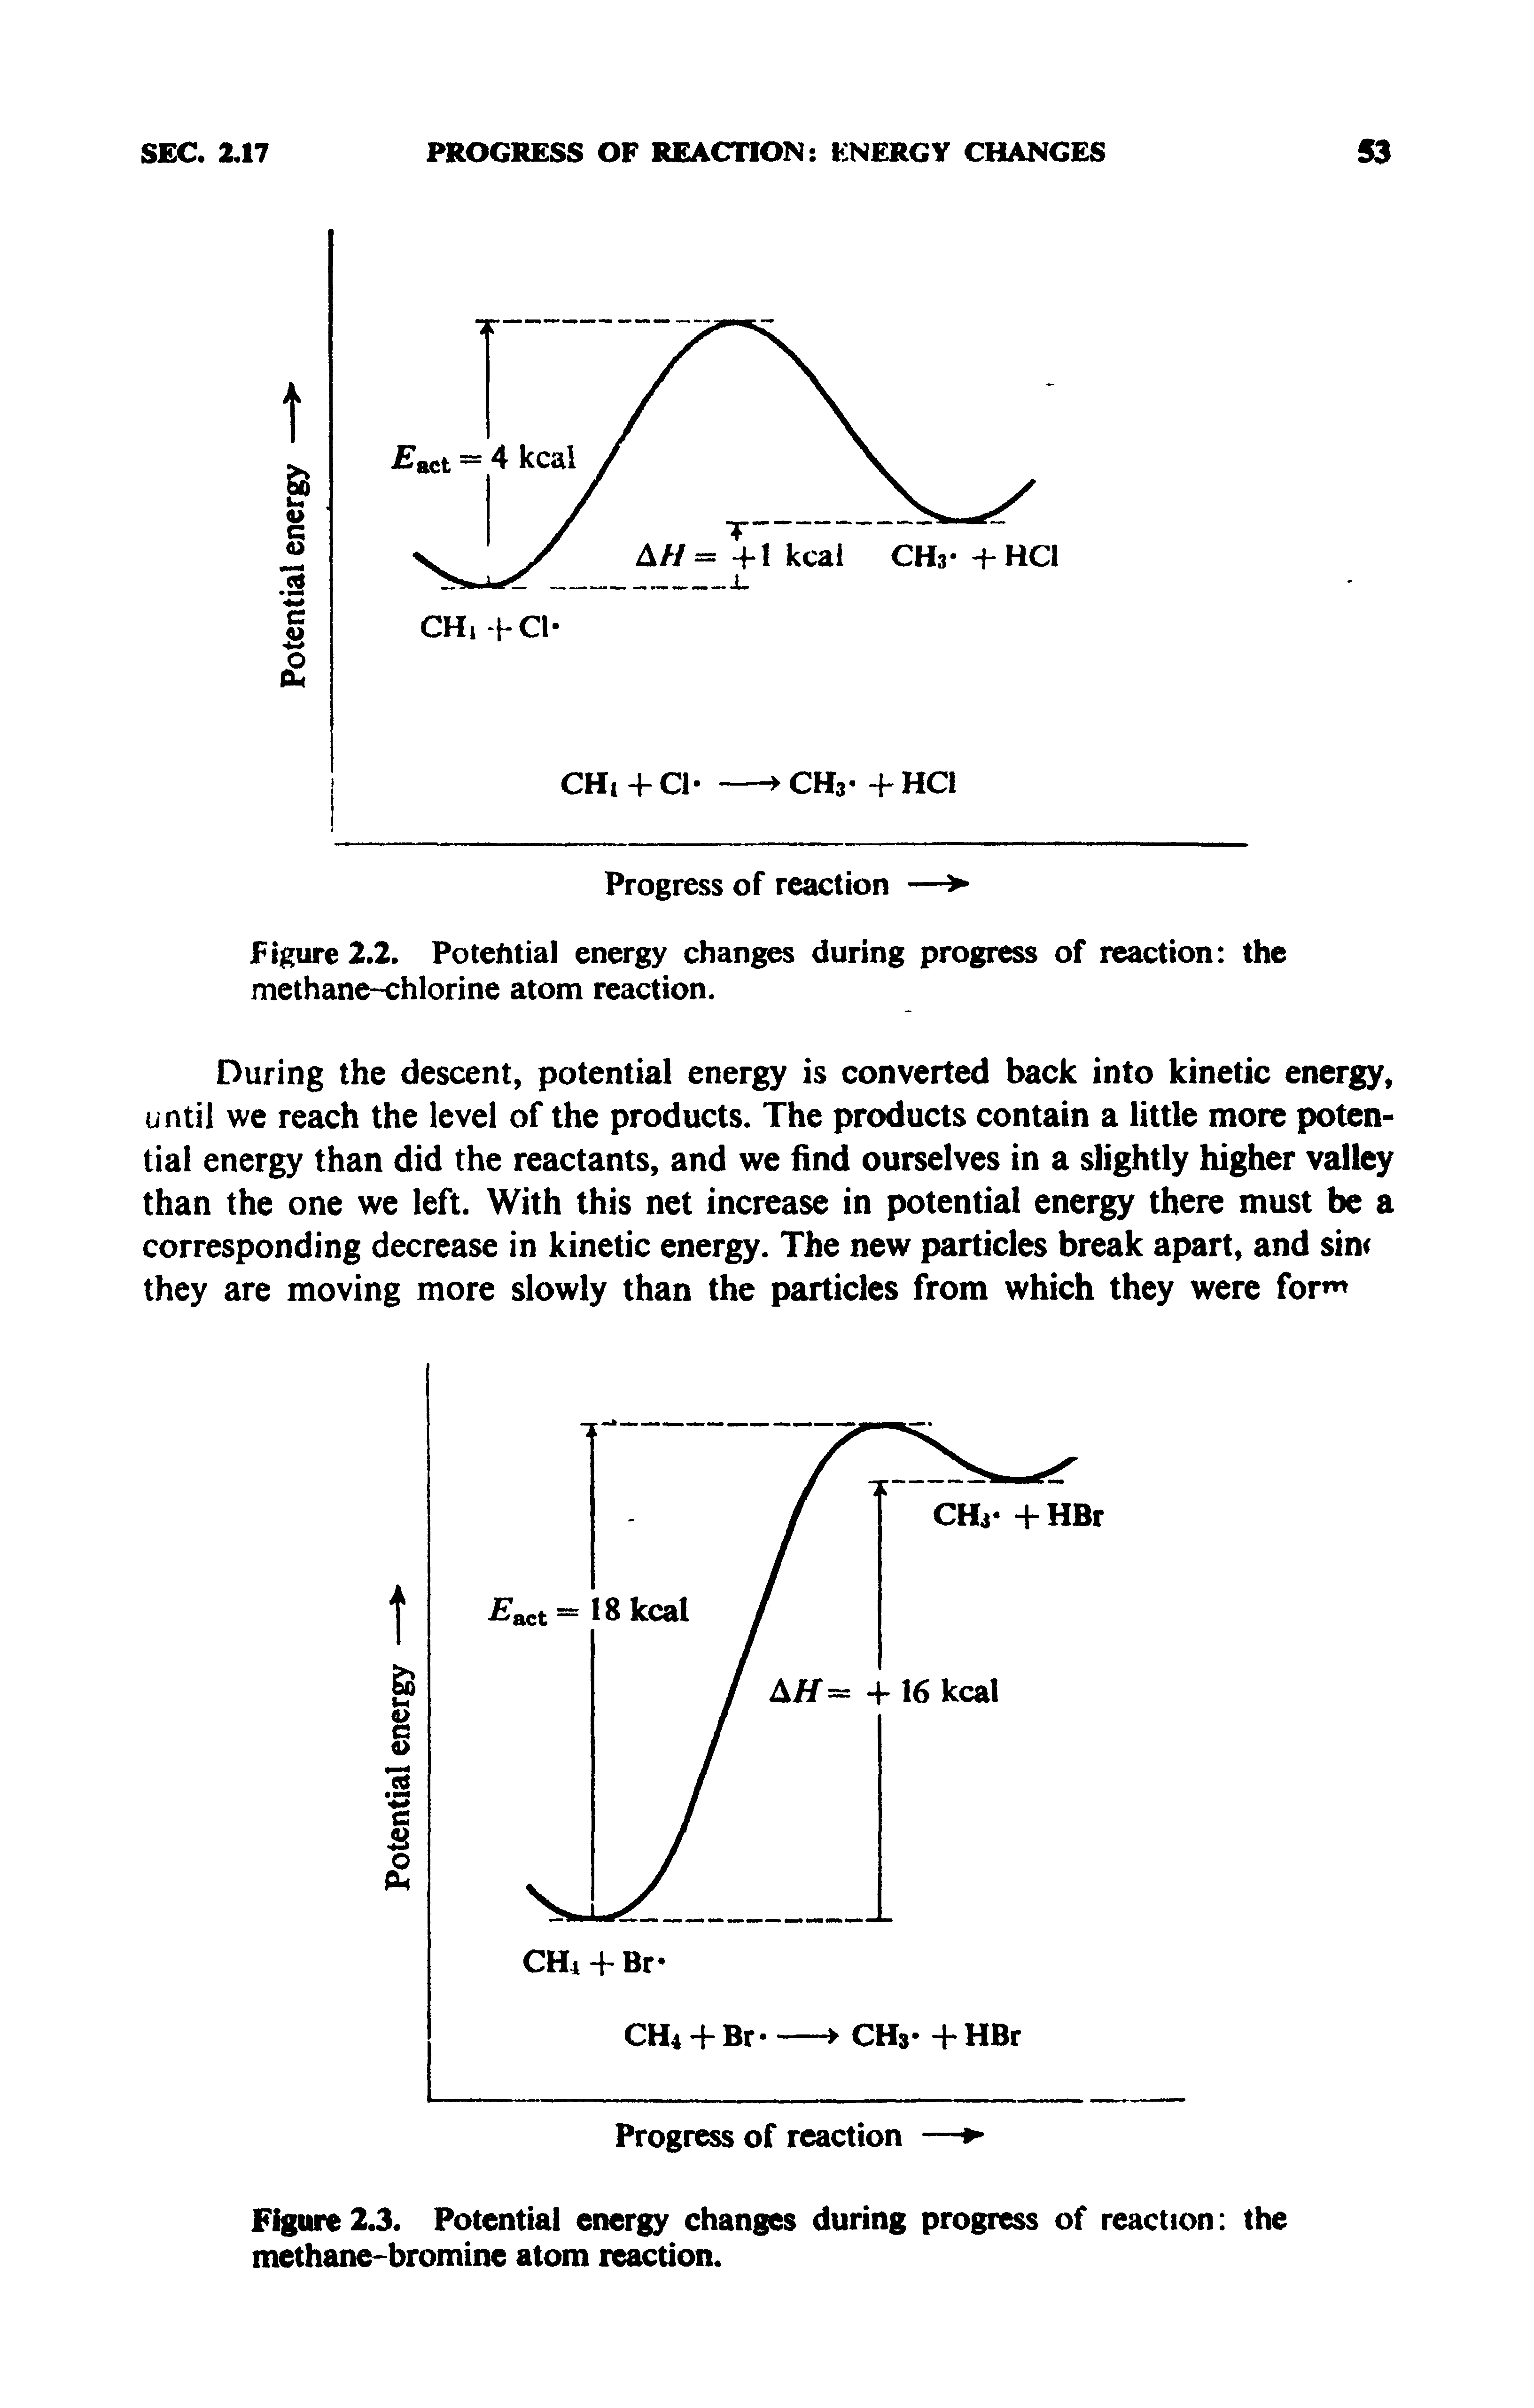 Figure 2.3. Potential energy changes during progress of reaction the methane-bromine atom reaction.